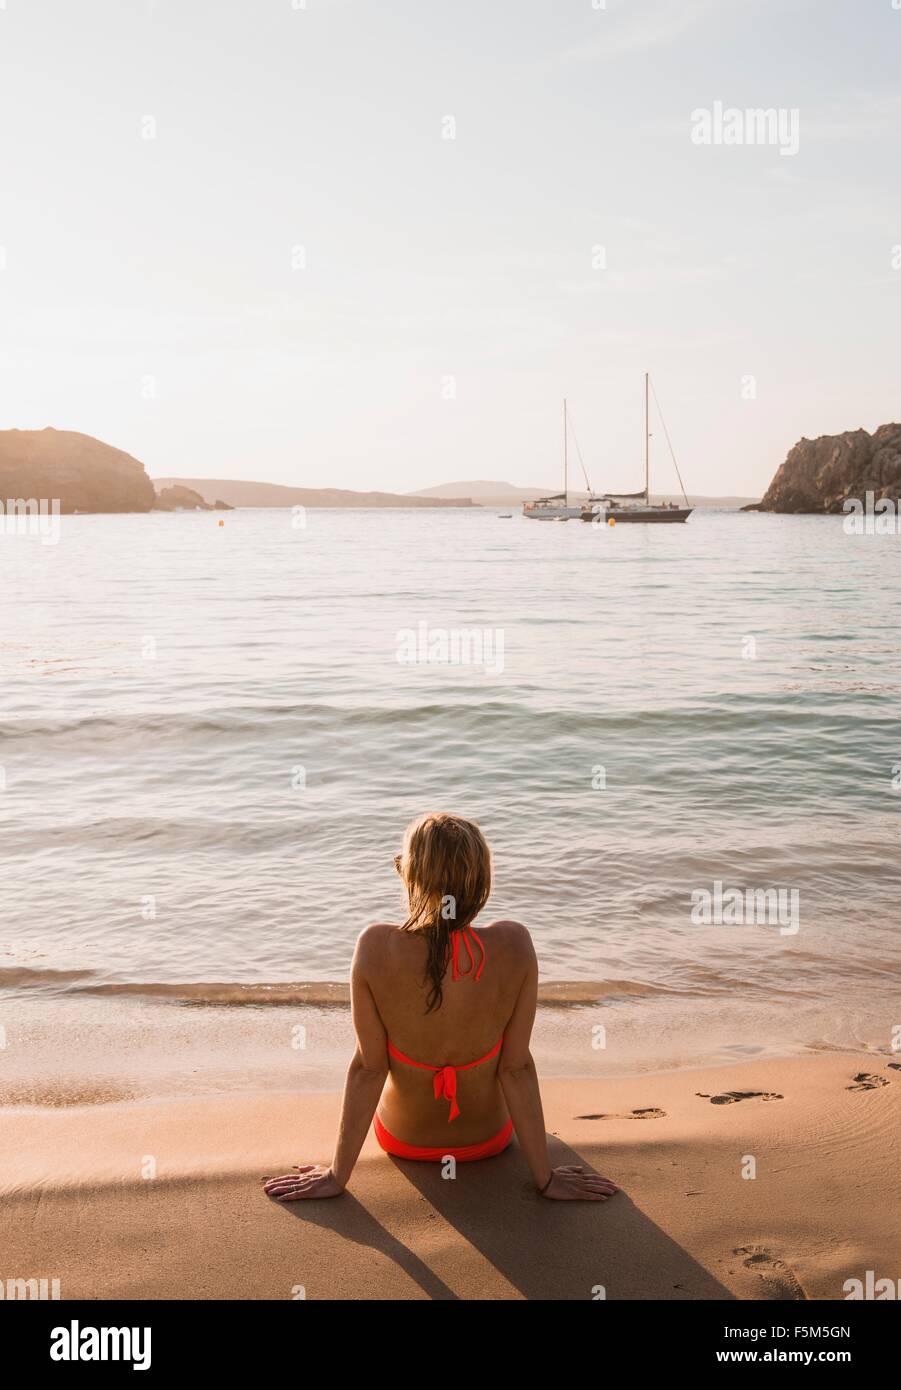 Rear view of woman sitting looking out from beach, Menorca, Balearic islands, Spain Stock Photo